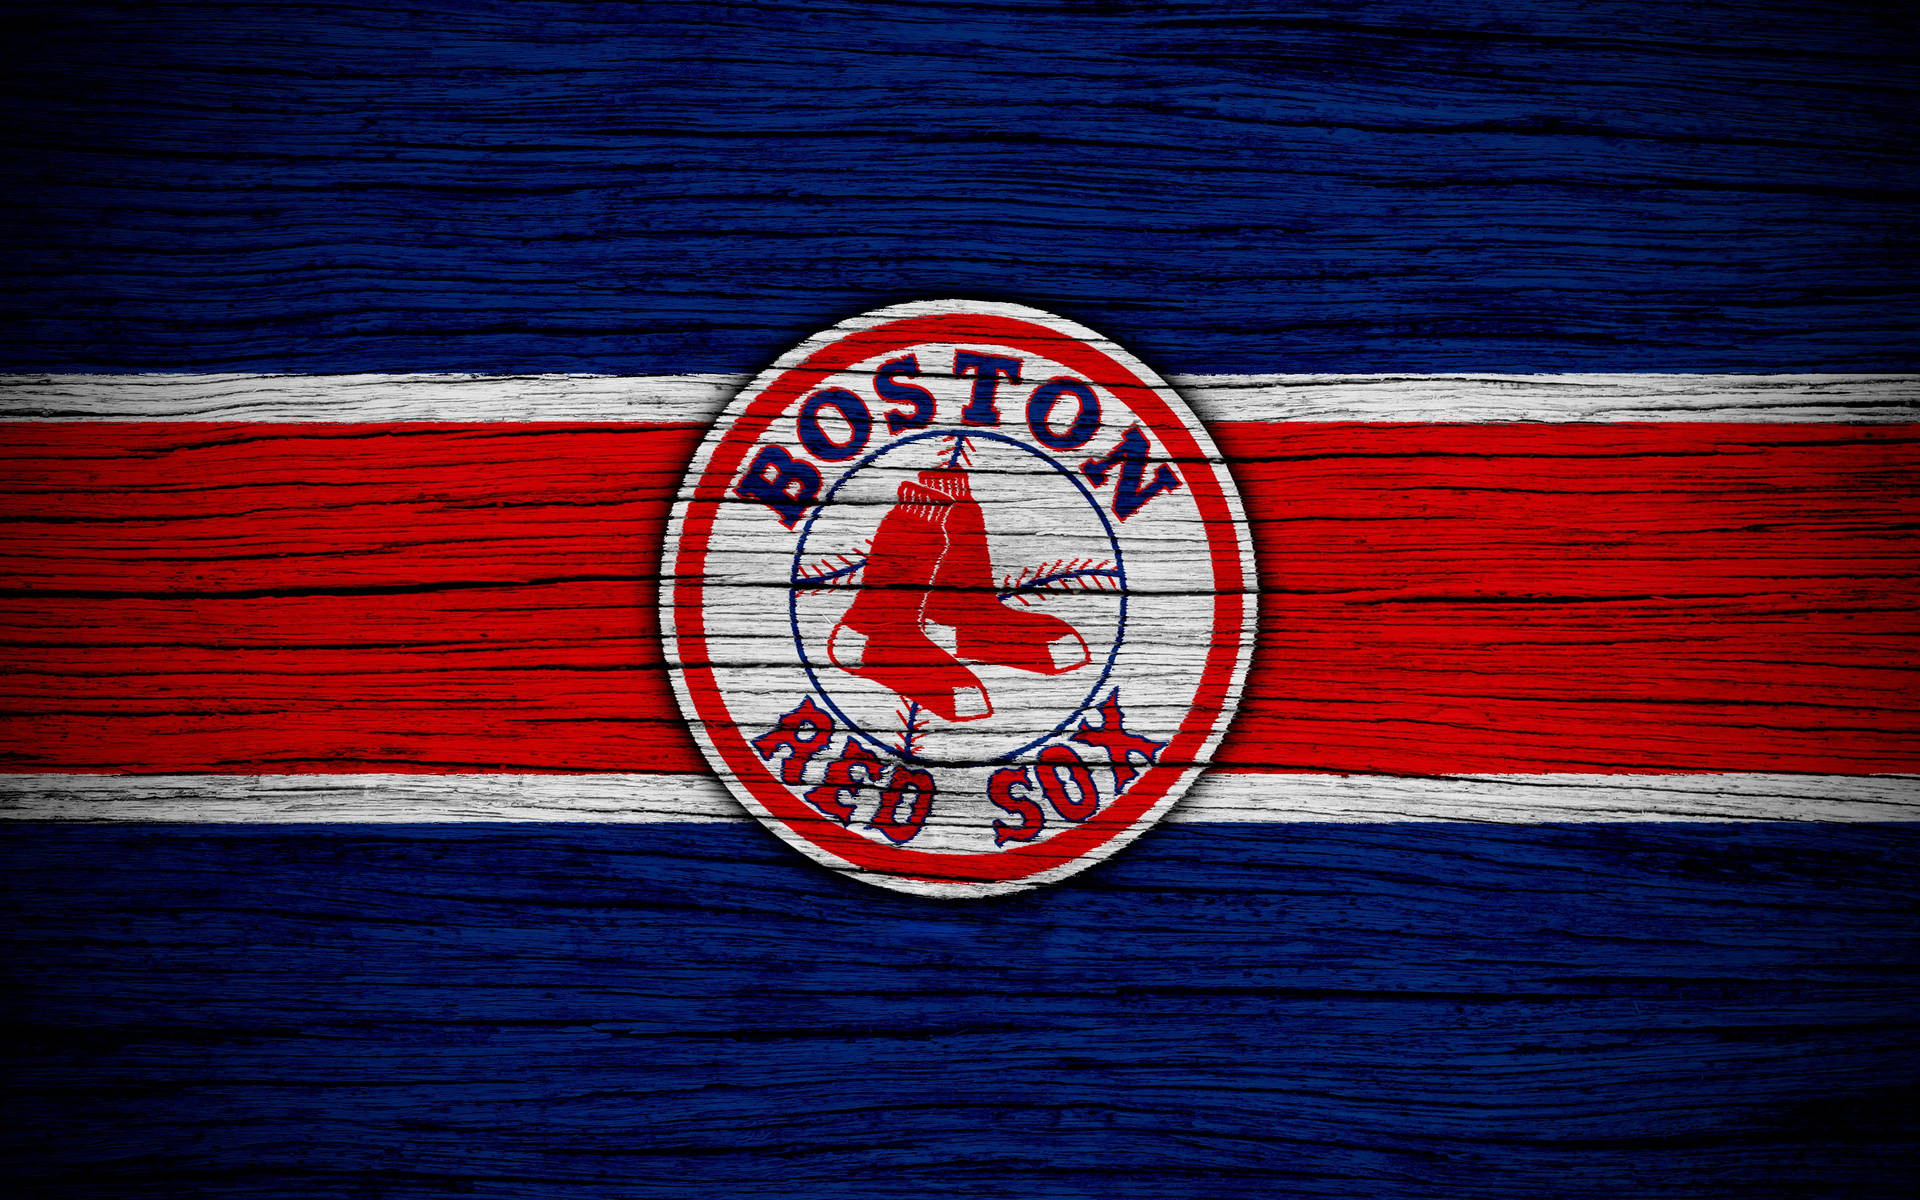 Boston Red Sox Painted Wood Wallpaper